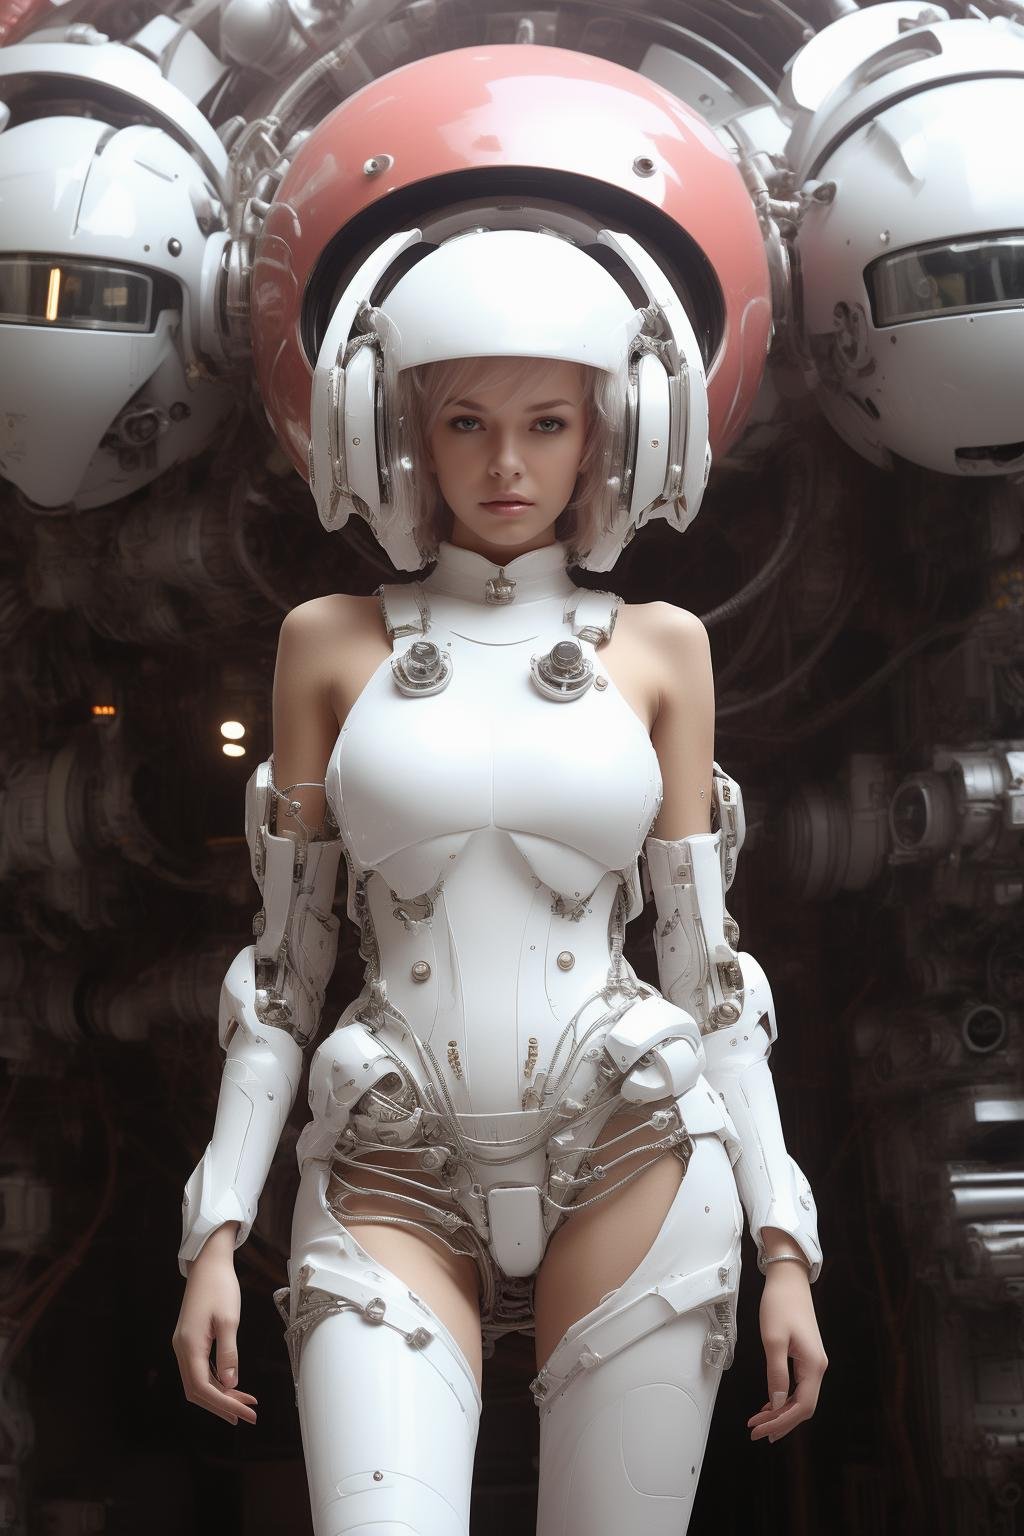 Best quality,masterpiece,ultra high res,(photorealistic:1.4),masterpiece,(bestquality),hyper-detailed,ultra-detailed,(1 girl:1.2),white bodysuit,wihte hair,(soft smile),mecha girl,(headphones:1.2),(cybernetic),bare shoulders,(mecha suit),(futuristic),(combat attire),(mix of organic and inorganic),(exposed circuitry),(hovering,(massive scale),(weaponized),(gleaming metal),(futuristic background),(mechanical beauty),(technology wonder),upper body,,,,,,,,,<lora:softmecha-000003:0.8>,,,,,,,,,,,,,,,,,